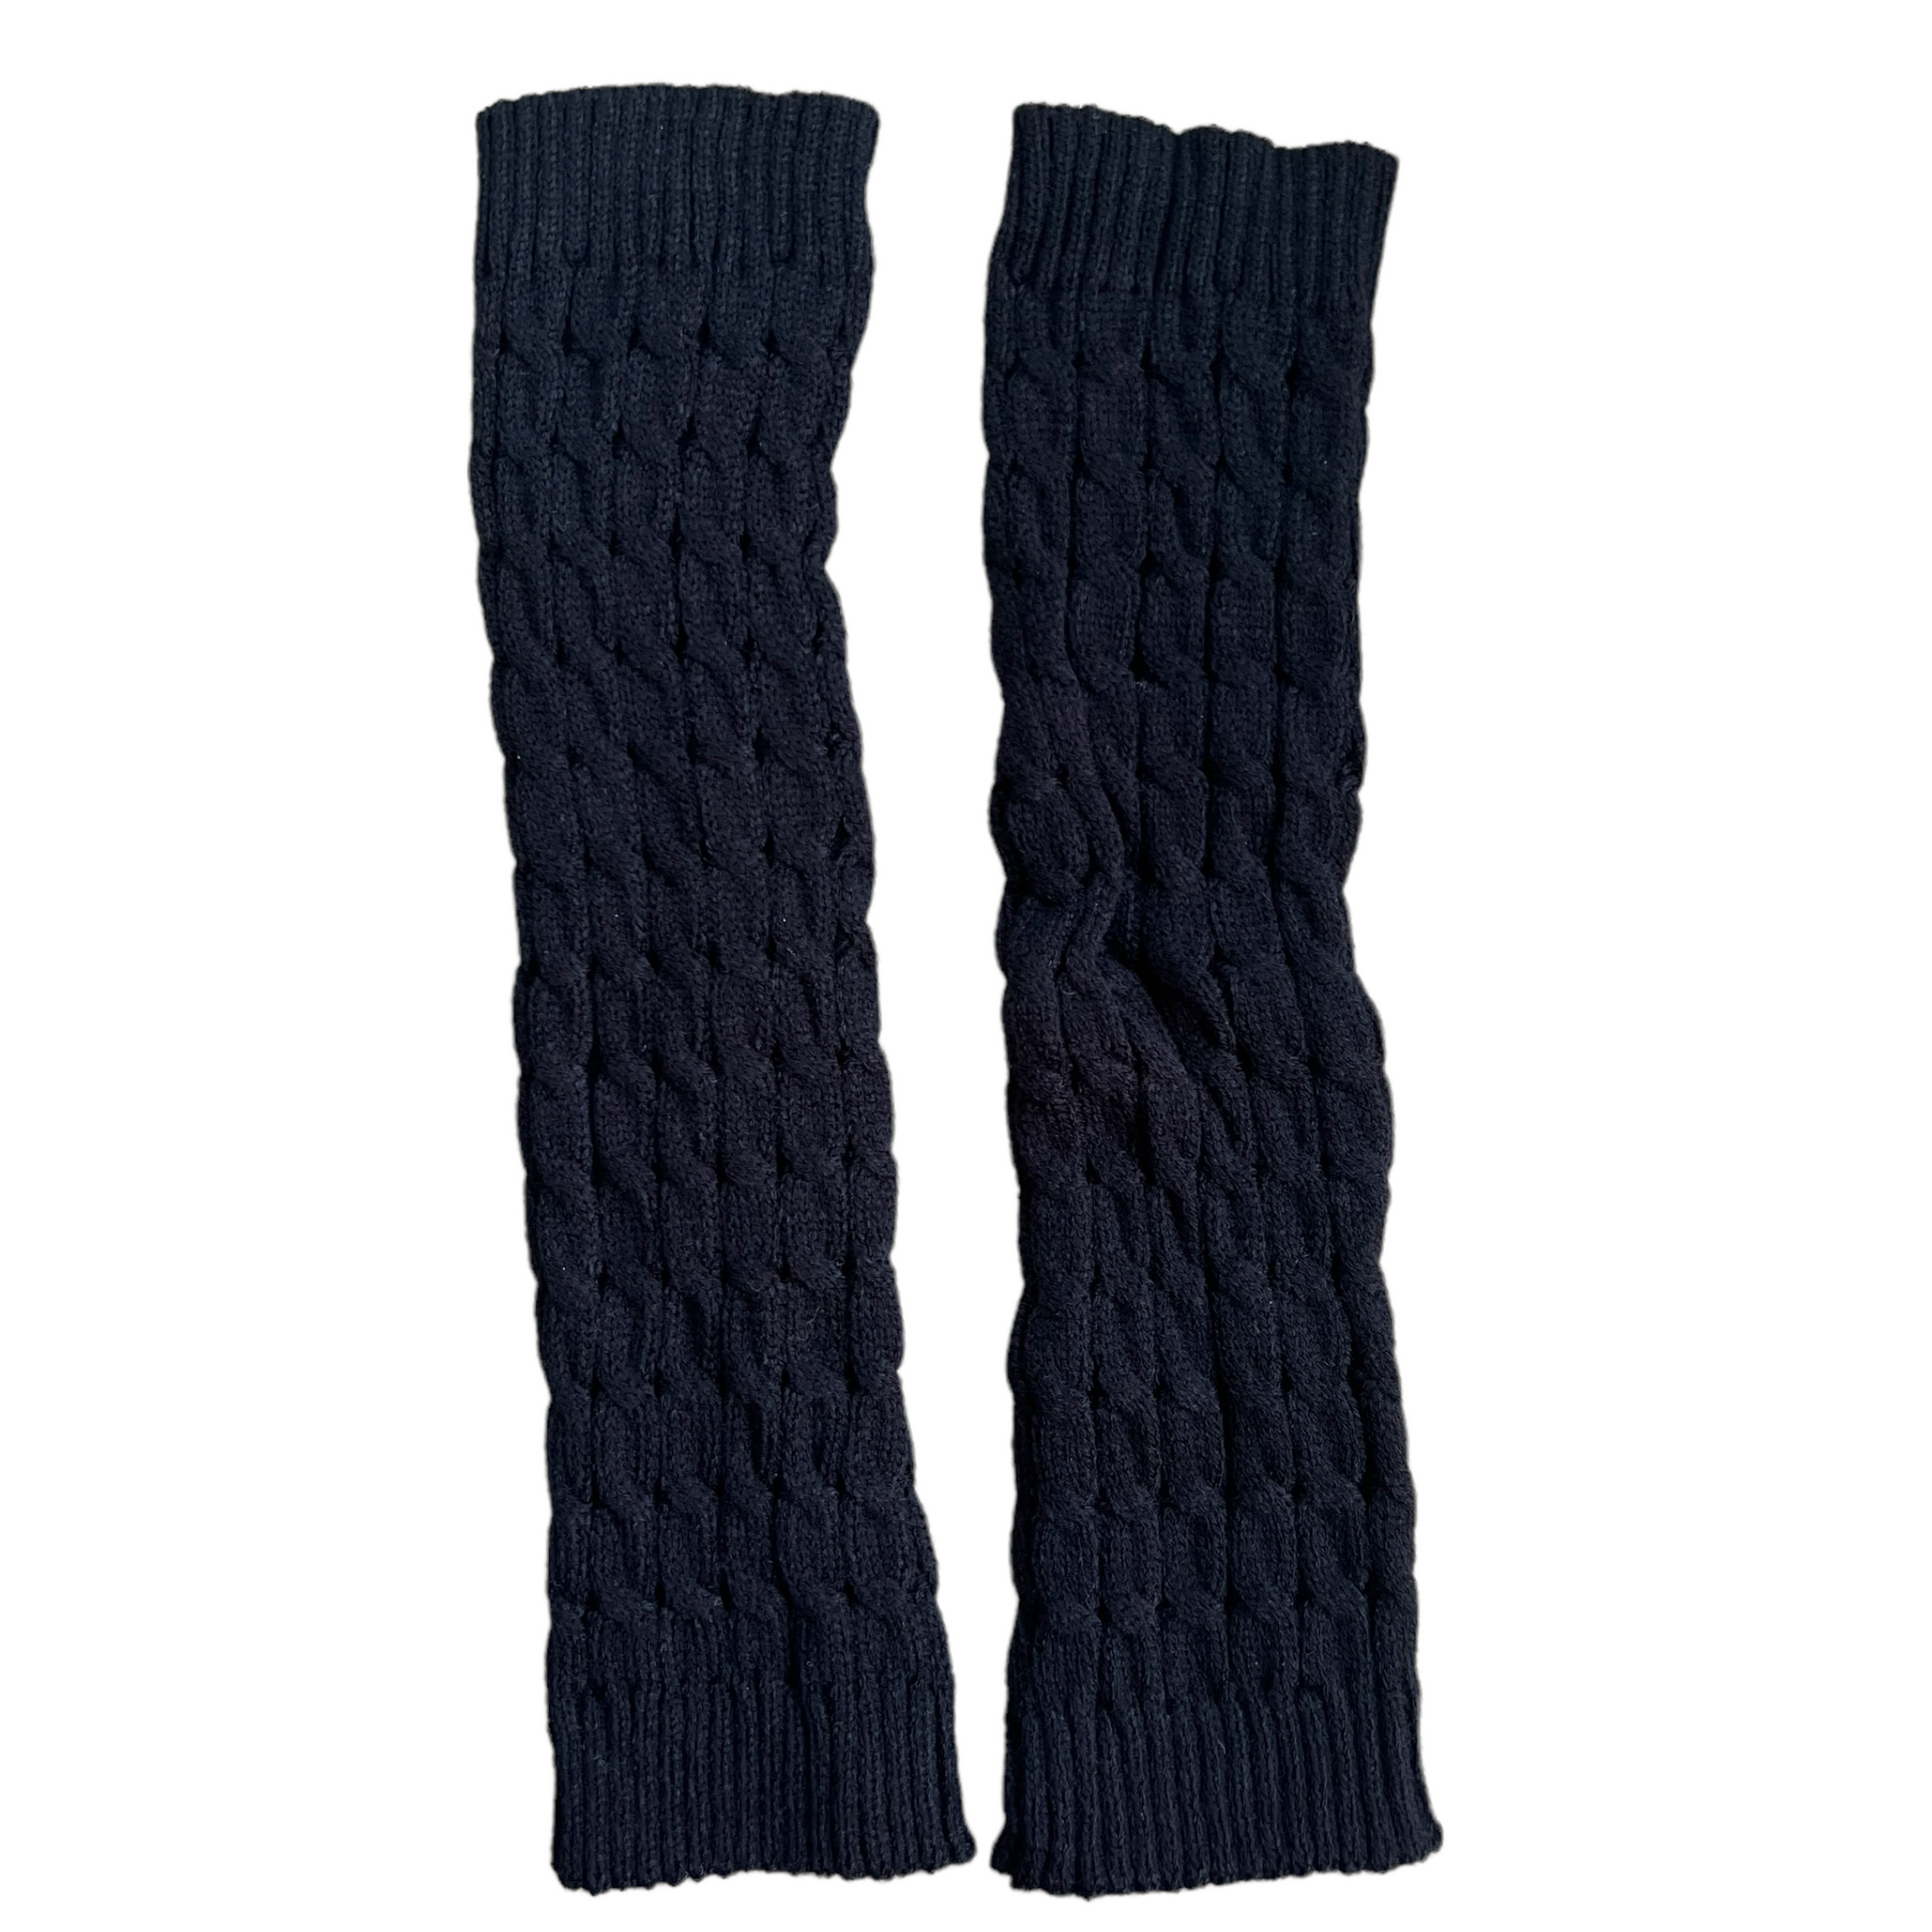 Knitted Leg Warmers Clothing SPIRIT SPARKPLUGS   